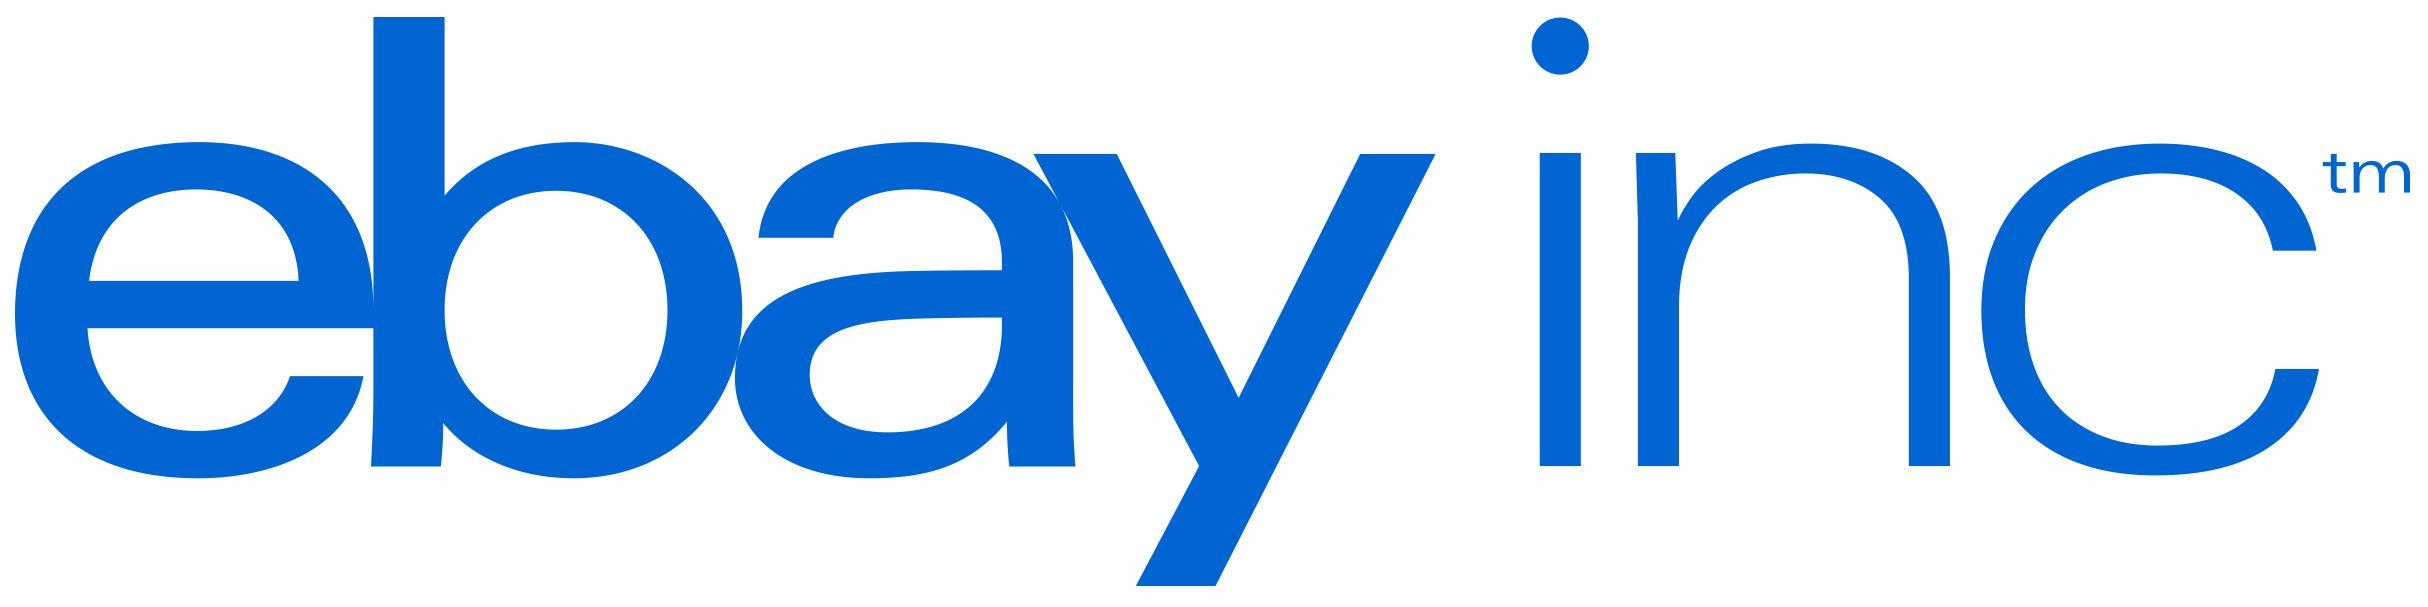 eBay Company Logo - eBay Inc. Issues Letter to Shareholders | Business Wire